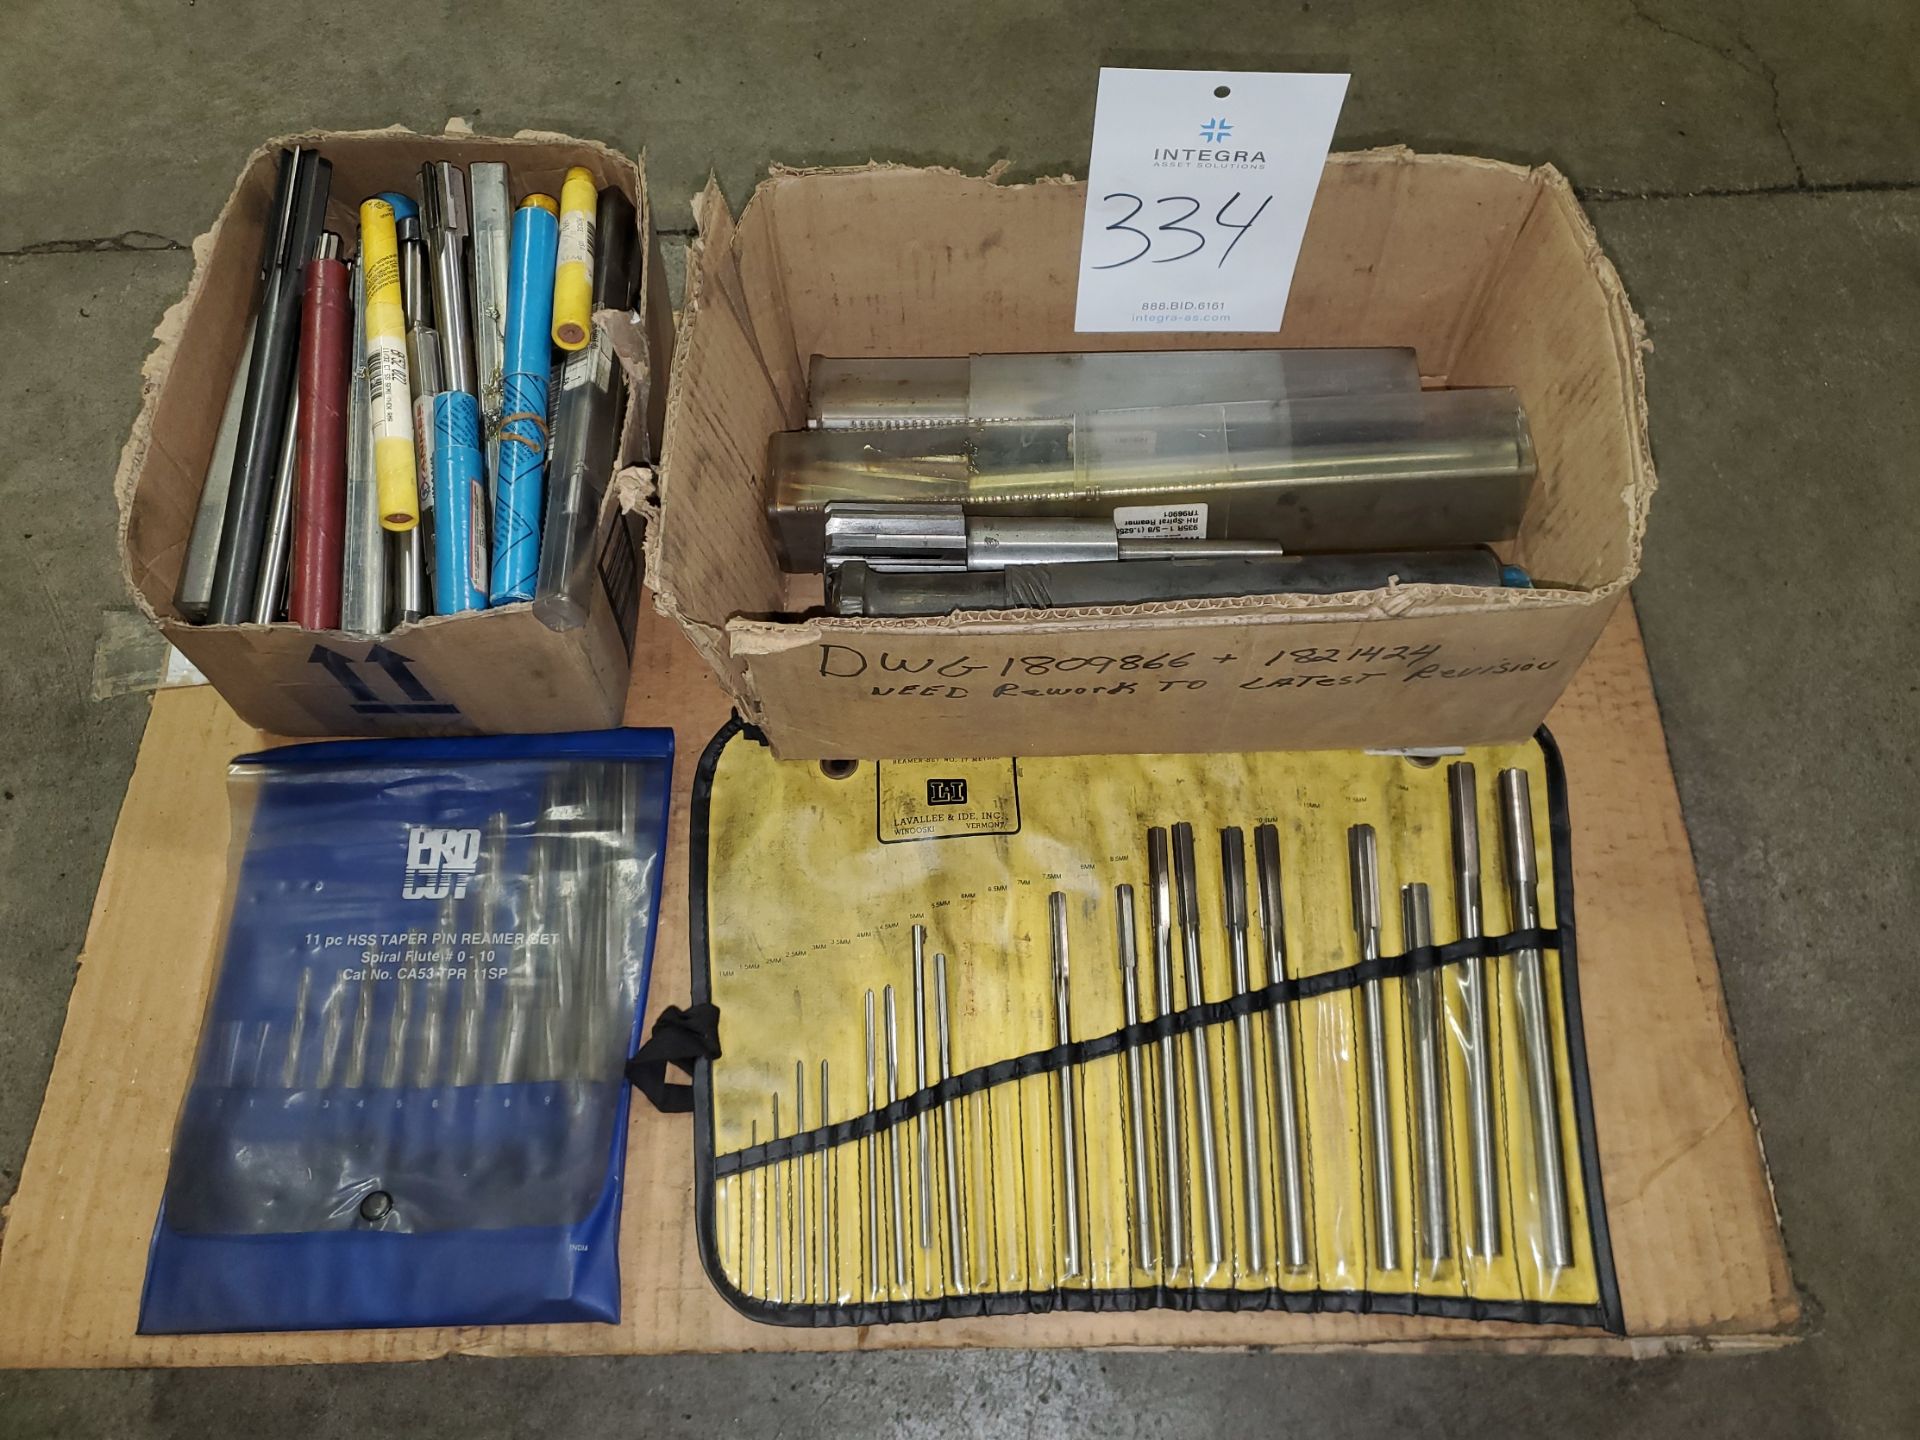 Lot of Assorted Reamers